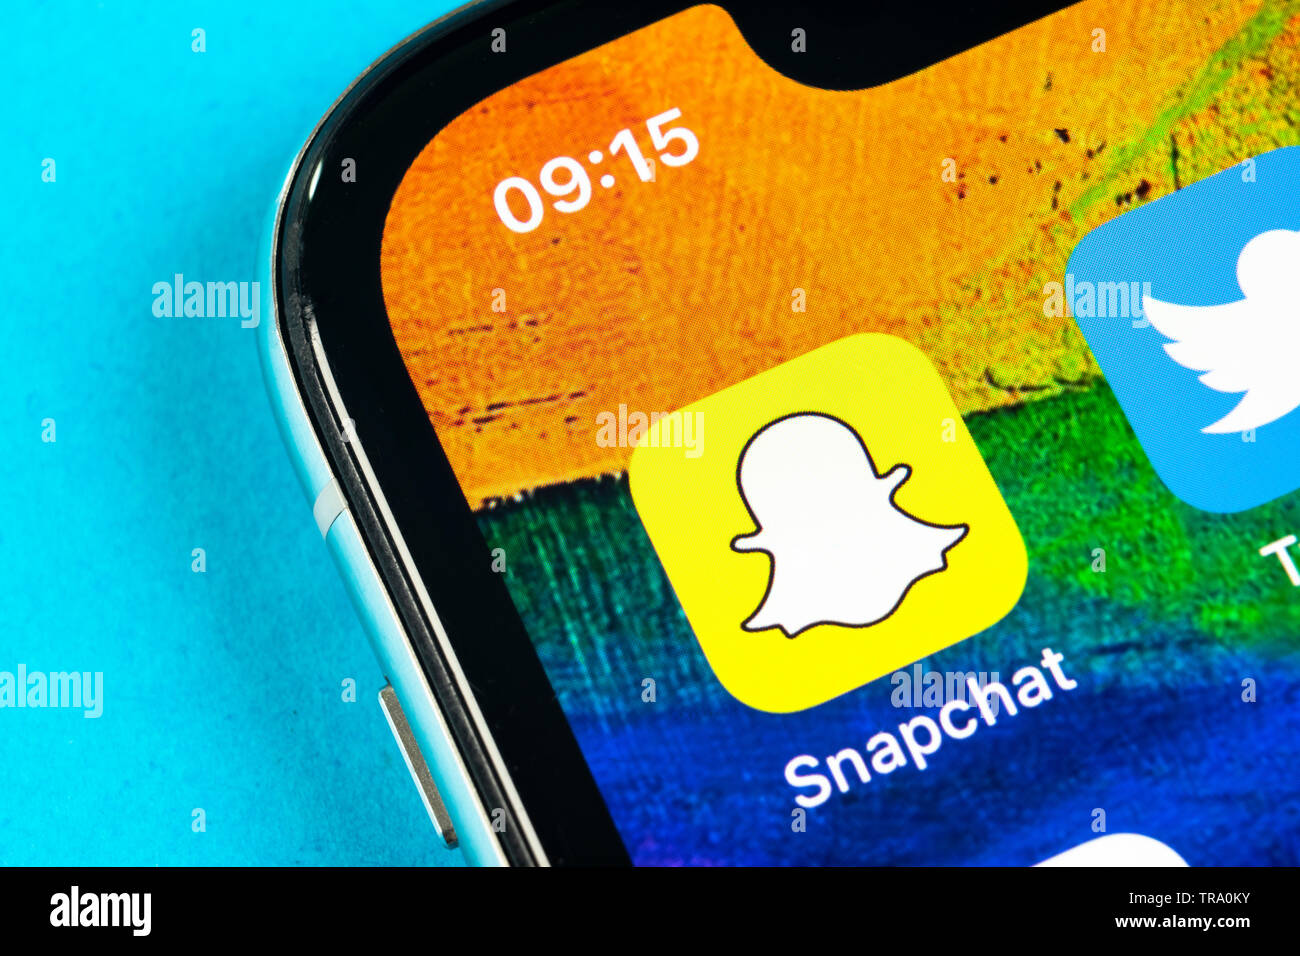 Helsinki, Finland, May 4, 2019: Snapchat application icon on Apple iPhone X smartphone screen close-up. Snapchat app icon. Social media icon. Social n Stock Photo